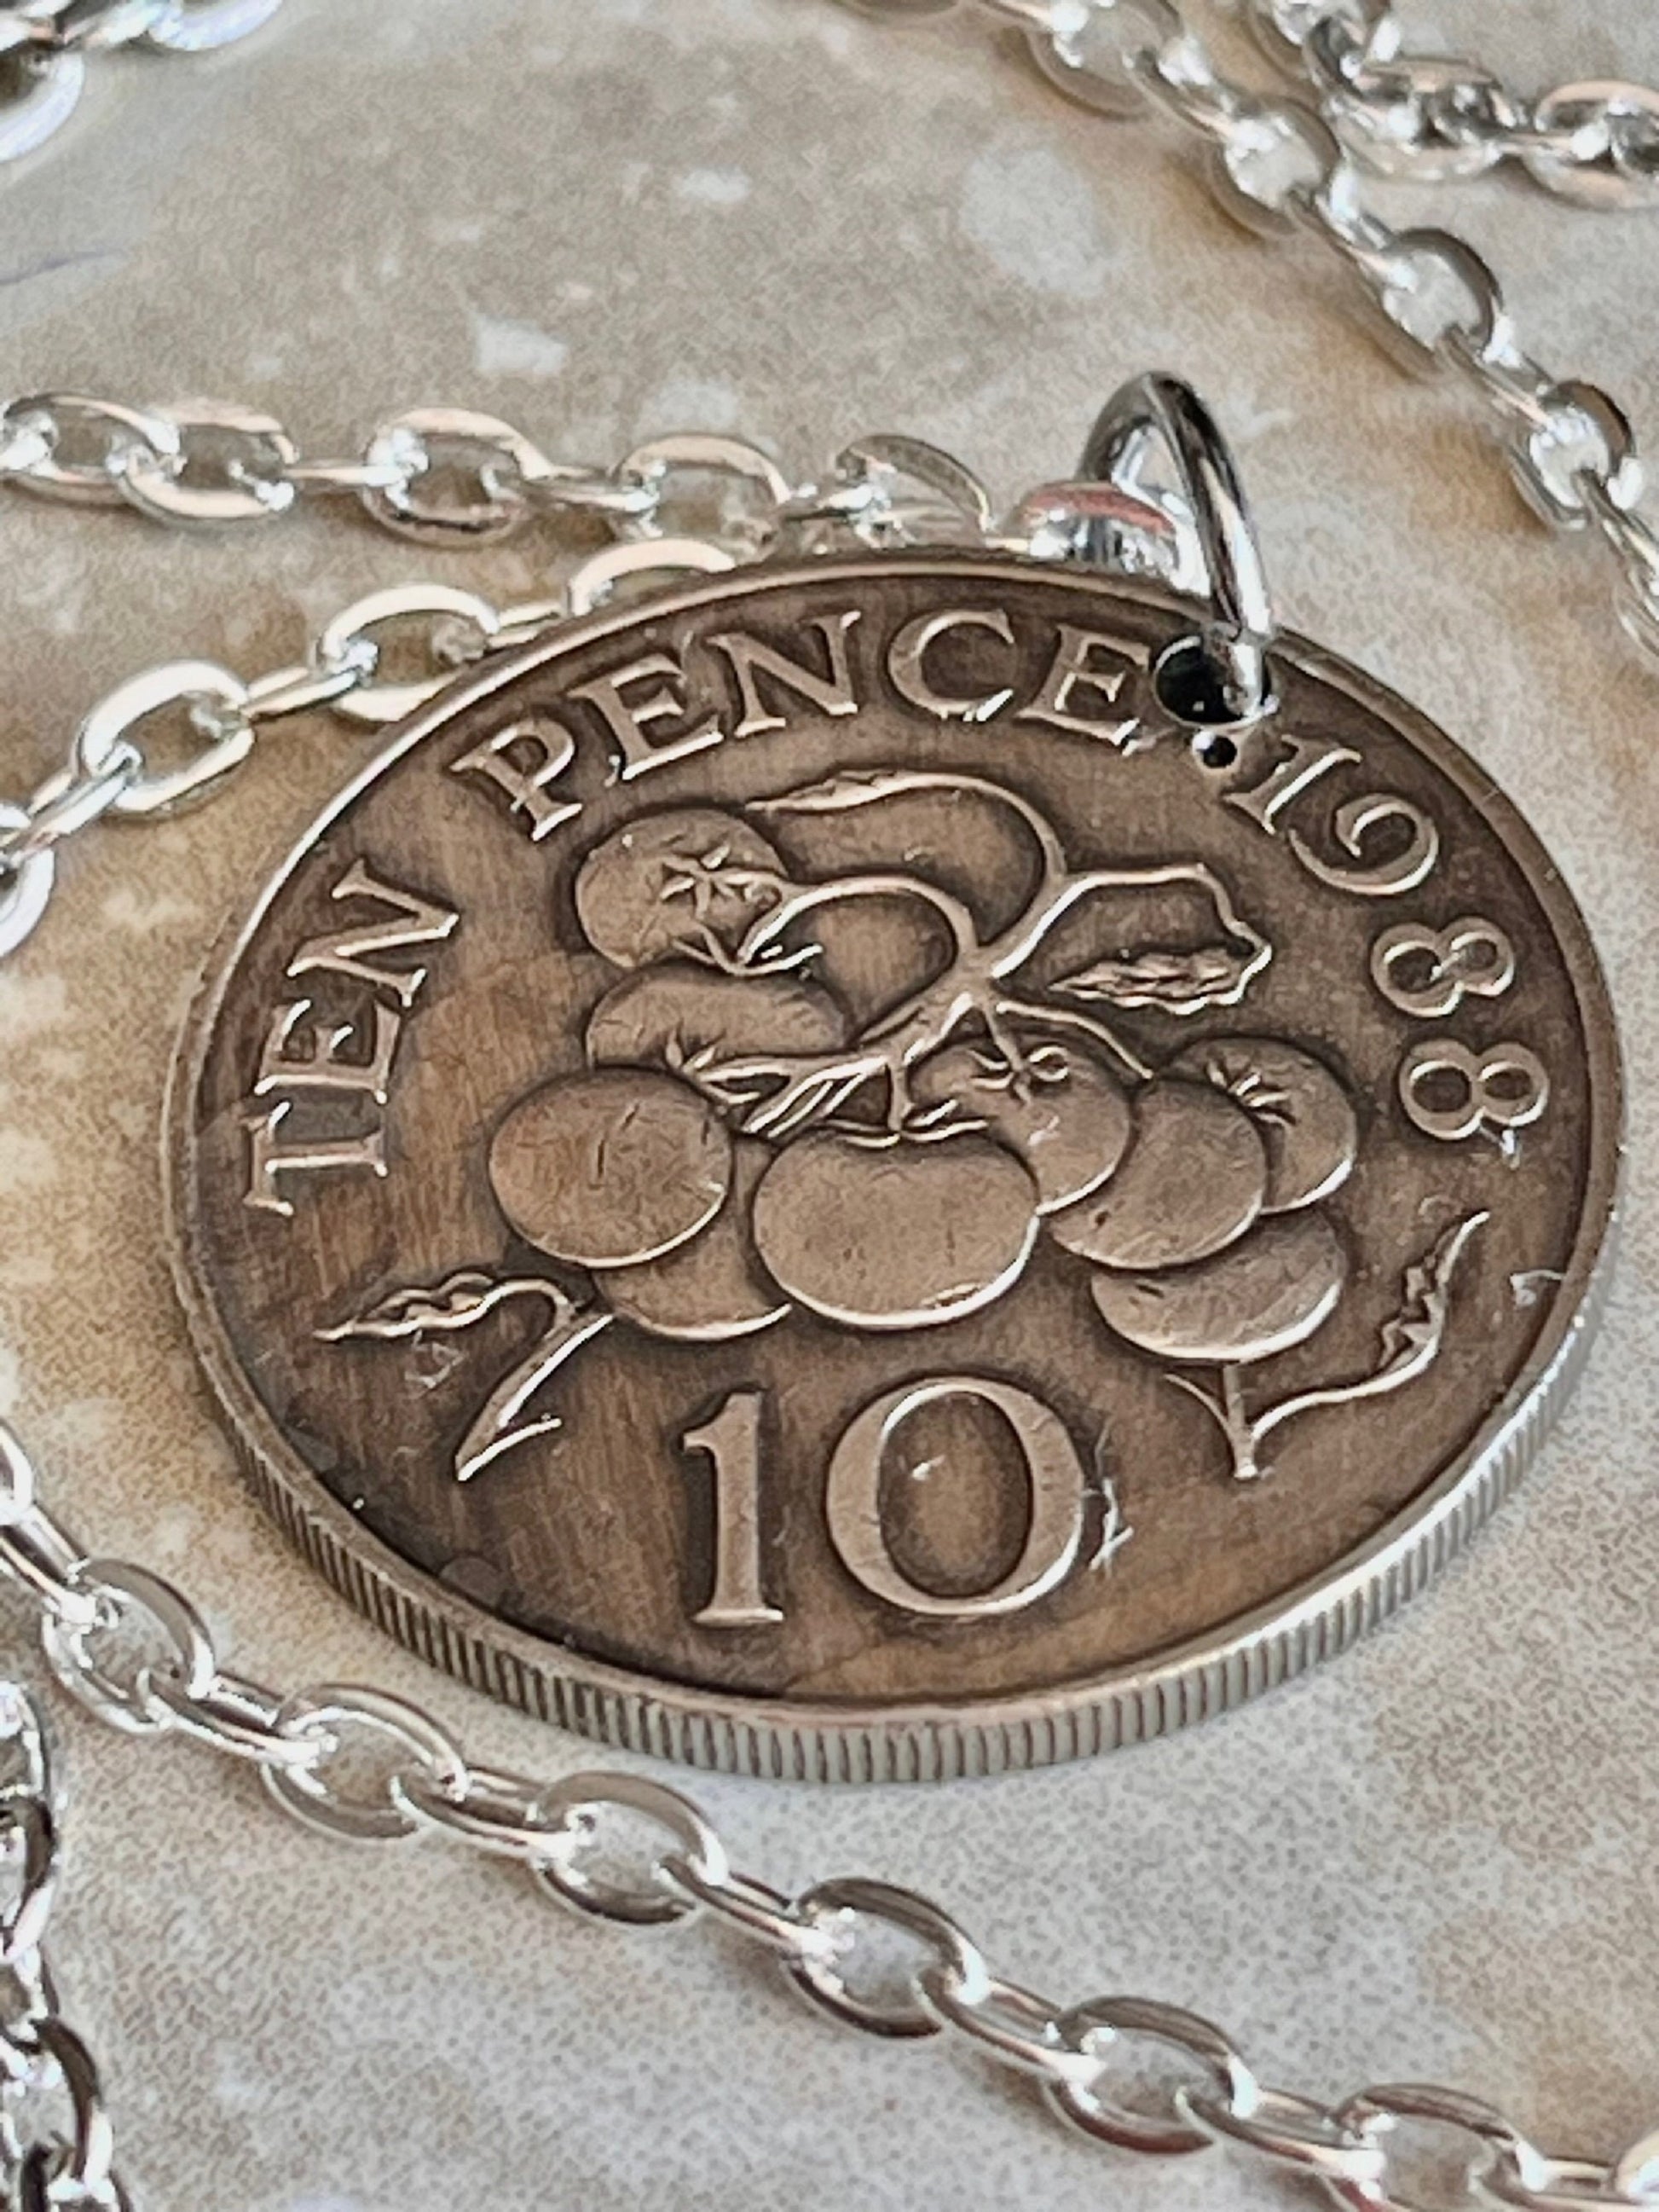 Guernsey Coin Necklace 10 Pence Pendant Handmade Custom Made Charm Gift For Friend Coin Charm Gift For Him Her, Coin Collector, World Coins